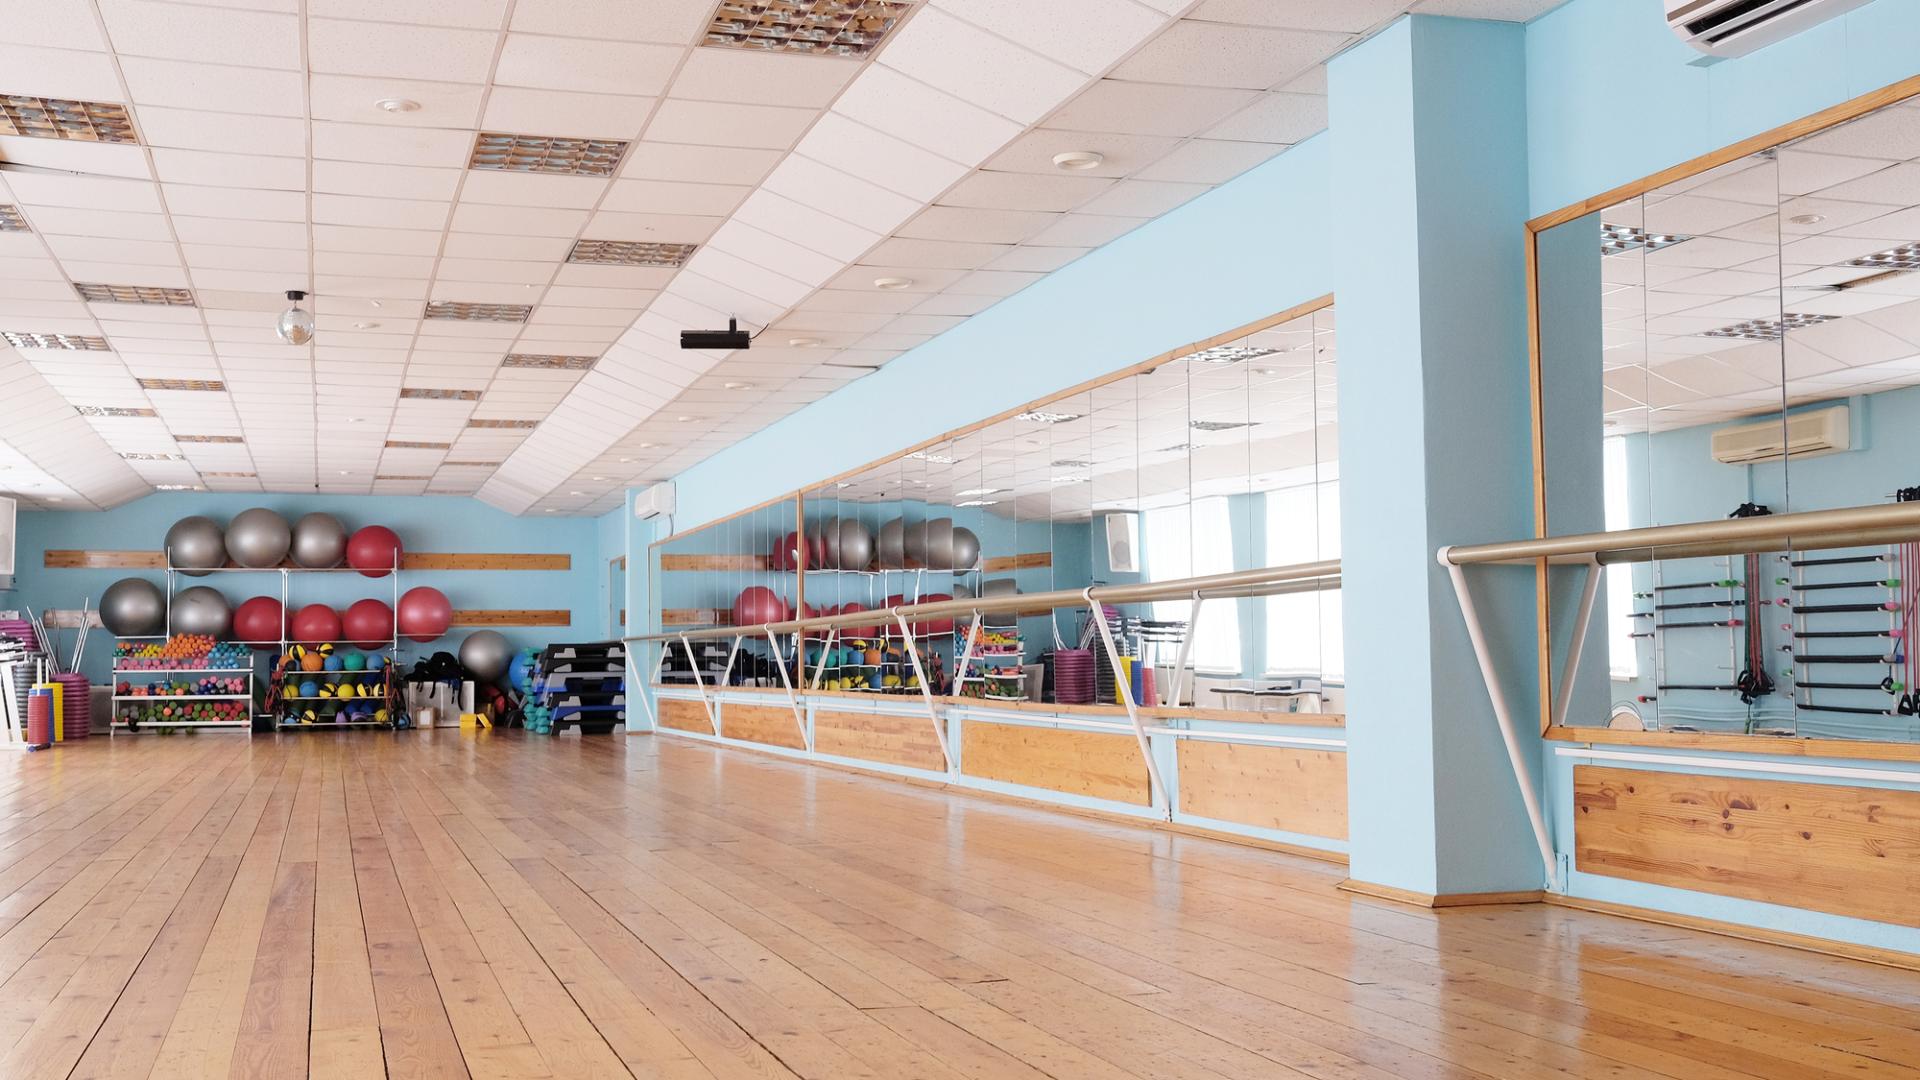 Dance Studios for Hire in Central London